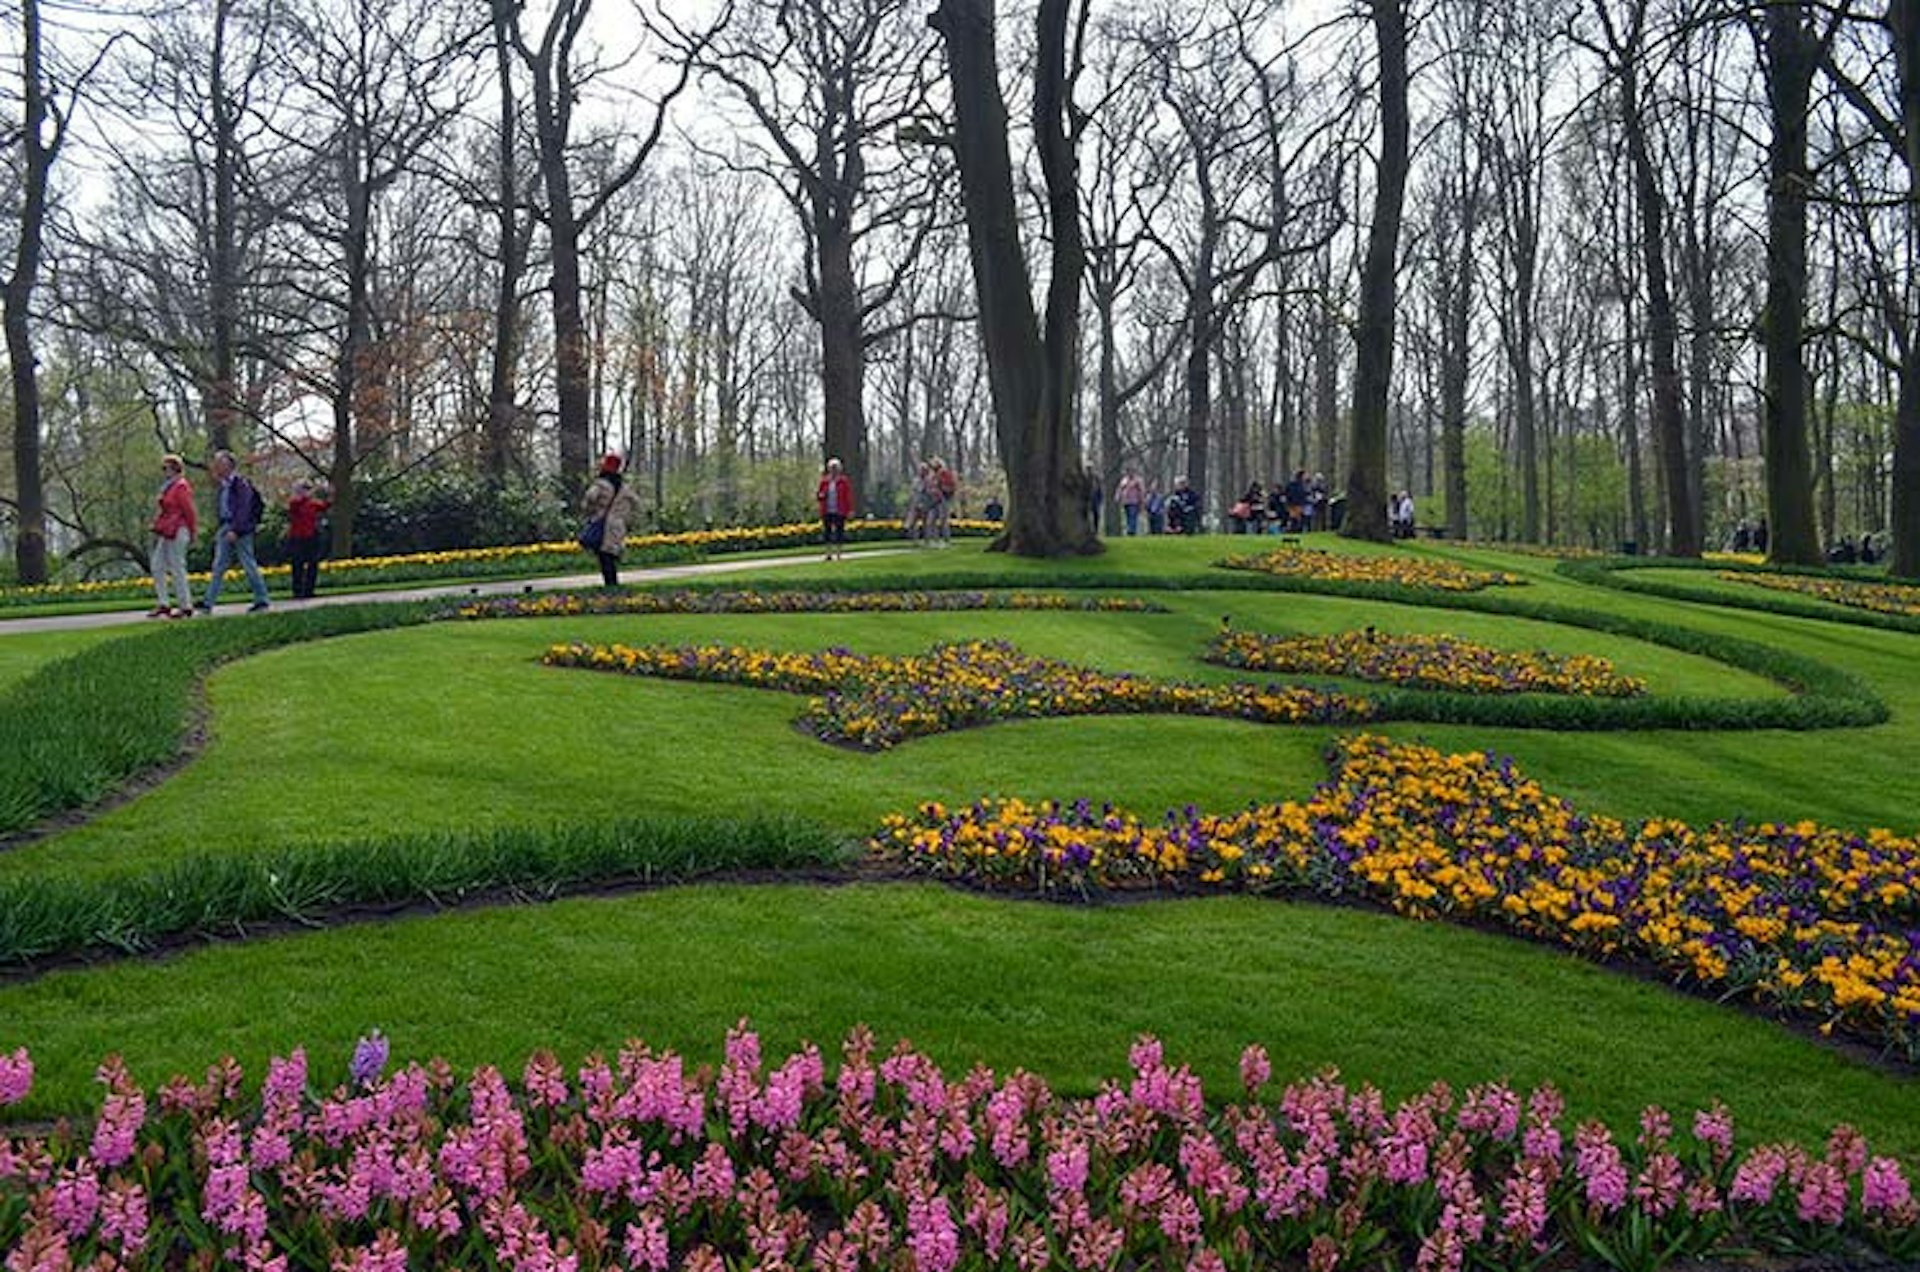 Springtime strolling in the Keukenhof gardens. Image by Kate Morgan / Lonely Planet.